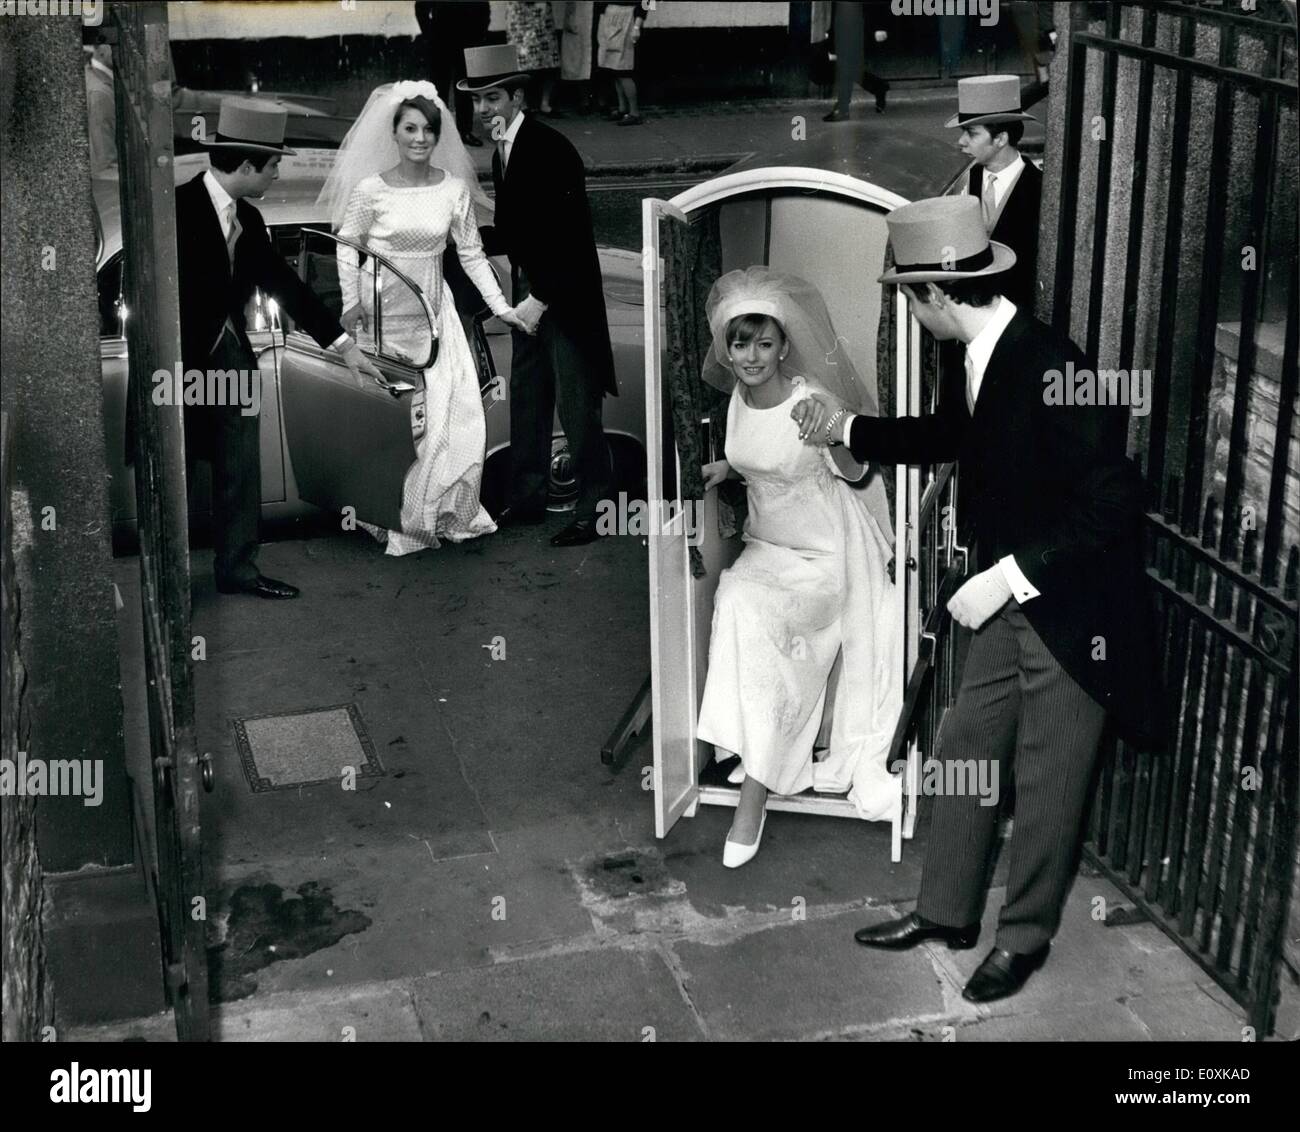 Mar. 03, 1967 - Getting to the Church on time - by Sedan: A bride in a four manned Sedan Chair versus a 210 horse power car, set off for St.Ann's Church in Wardour Street, from Young's Dress Hire, 178, Wardour Street, W.L this morning - to prove that in congested towns, man power beats motor power at getting the bride to church on time. Especially at Easter, Bridal hire specialist Louis Young thinks the return of the sedan chair could be a pretty and practical idea for brides, traffic jams,'' he says, ''it is becoming more and more difficult to get to the church on time Stock Photo